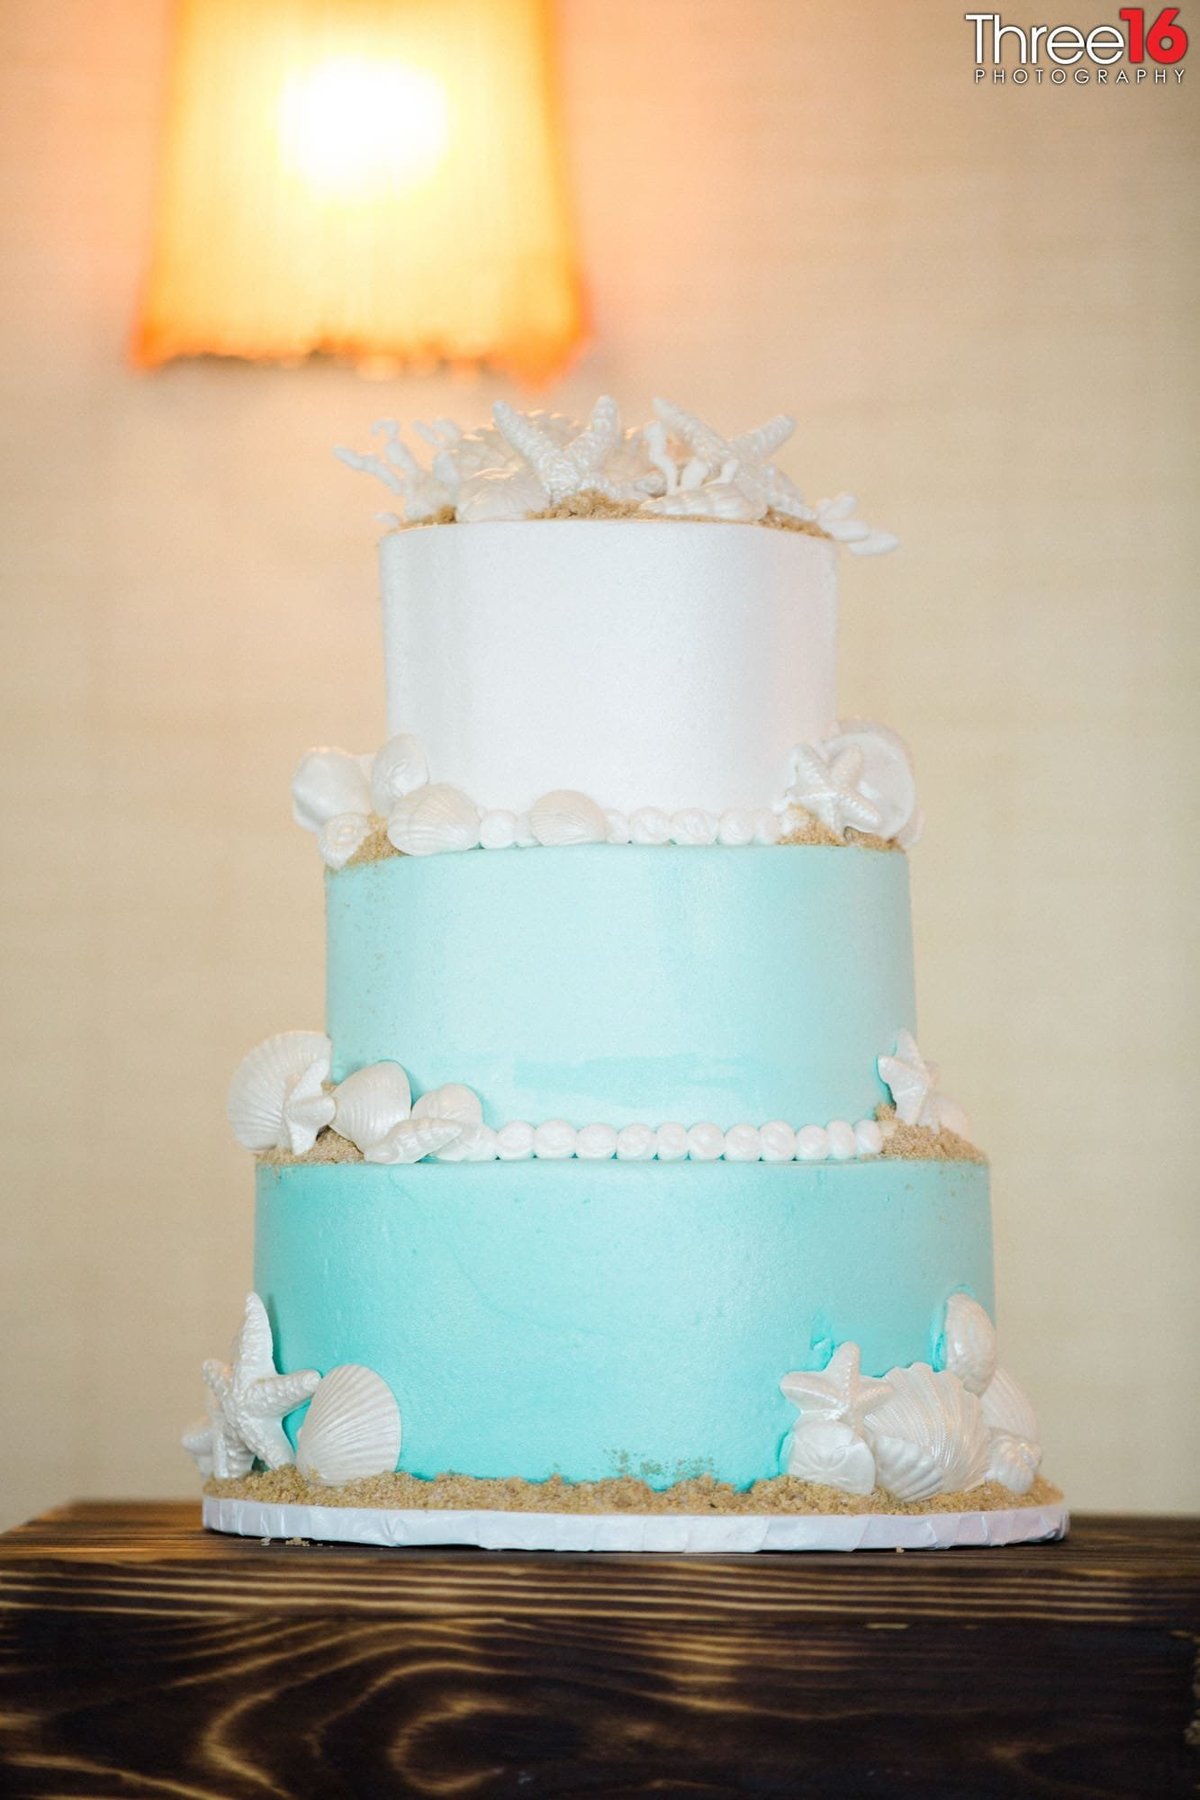 Lovely 3-tiered wedding cake